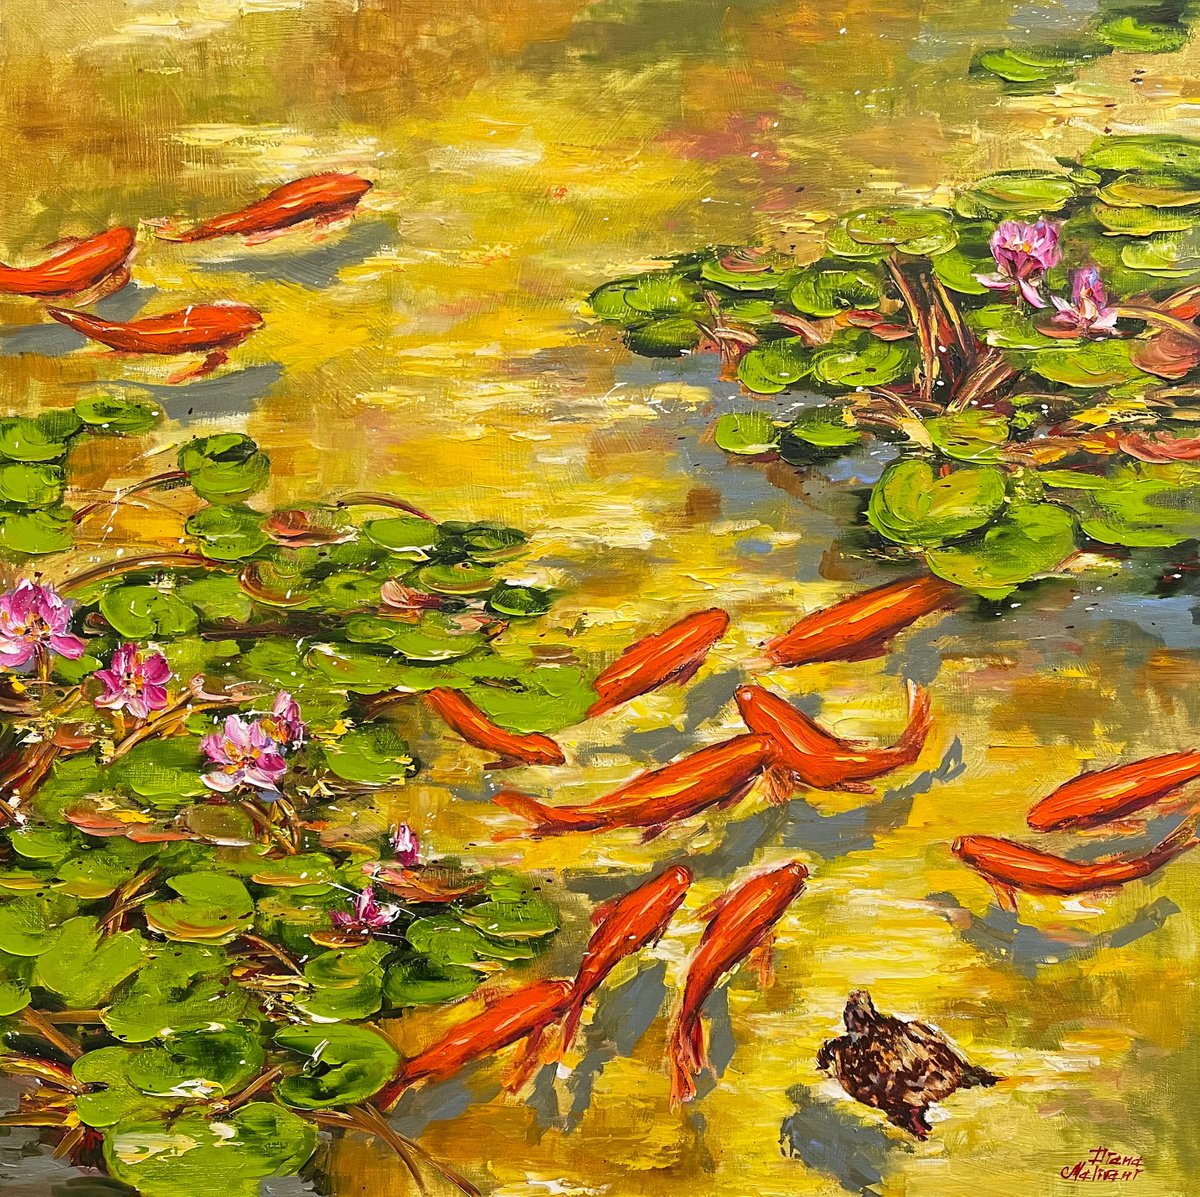 Koi Fish Pond with a Little Turtle by Diana Malivani